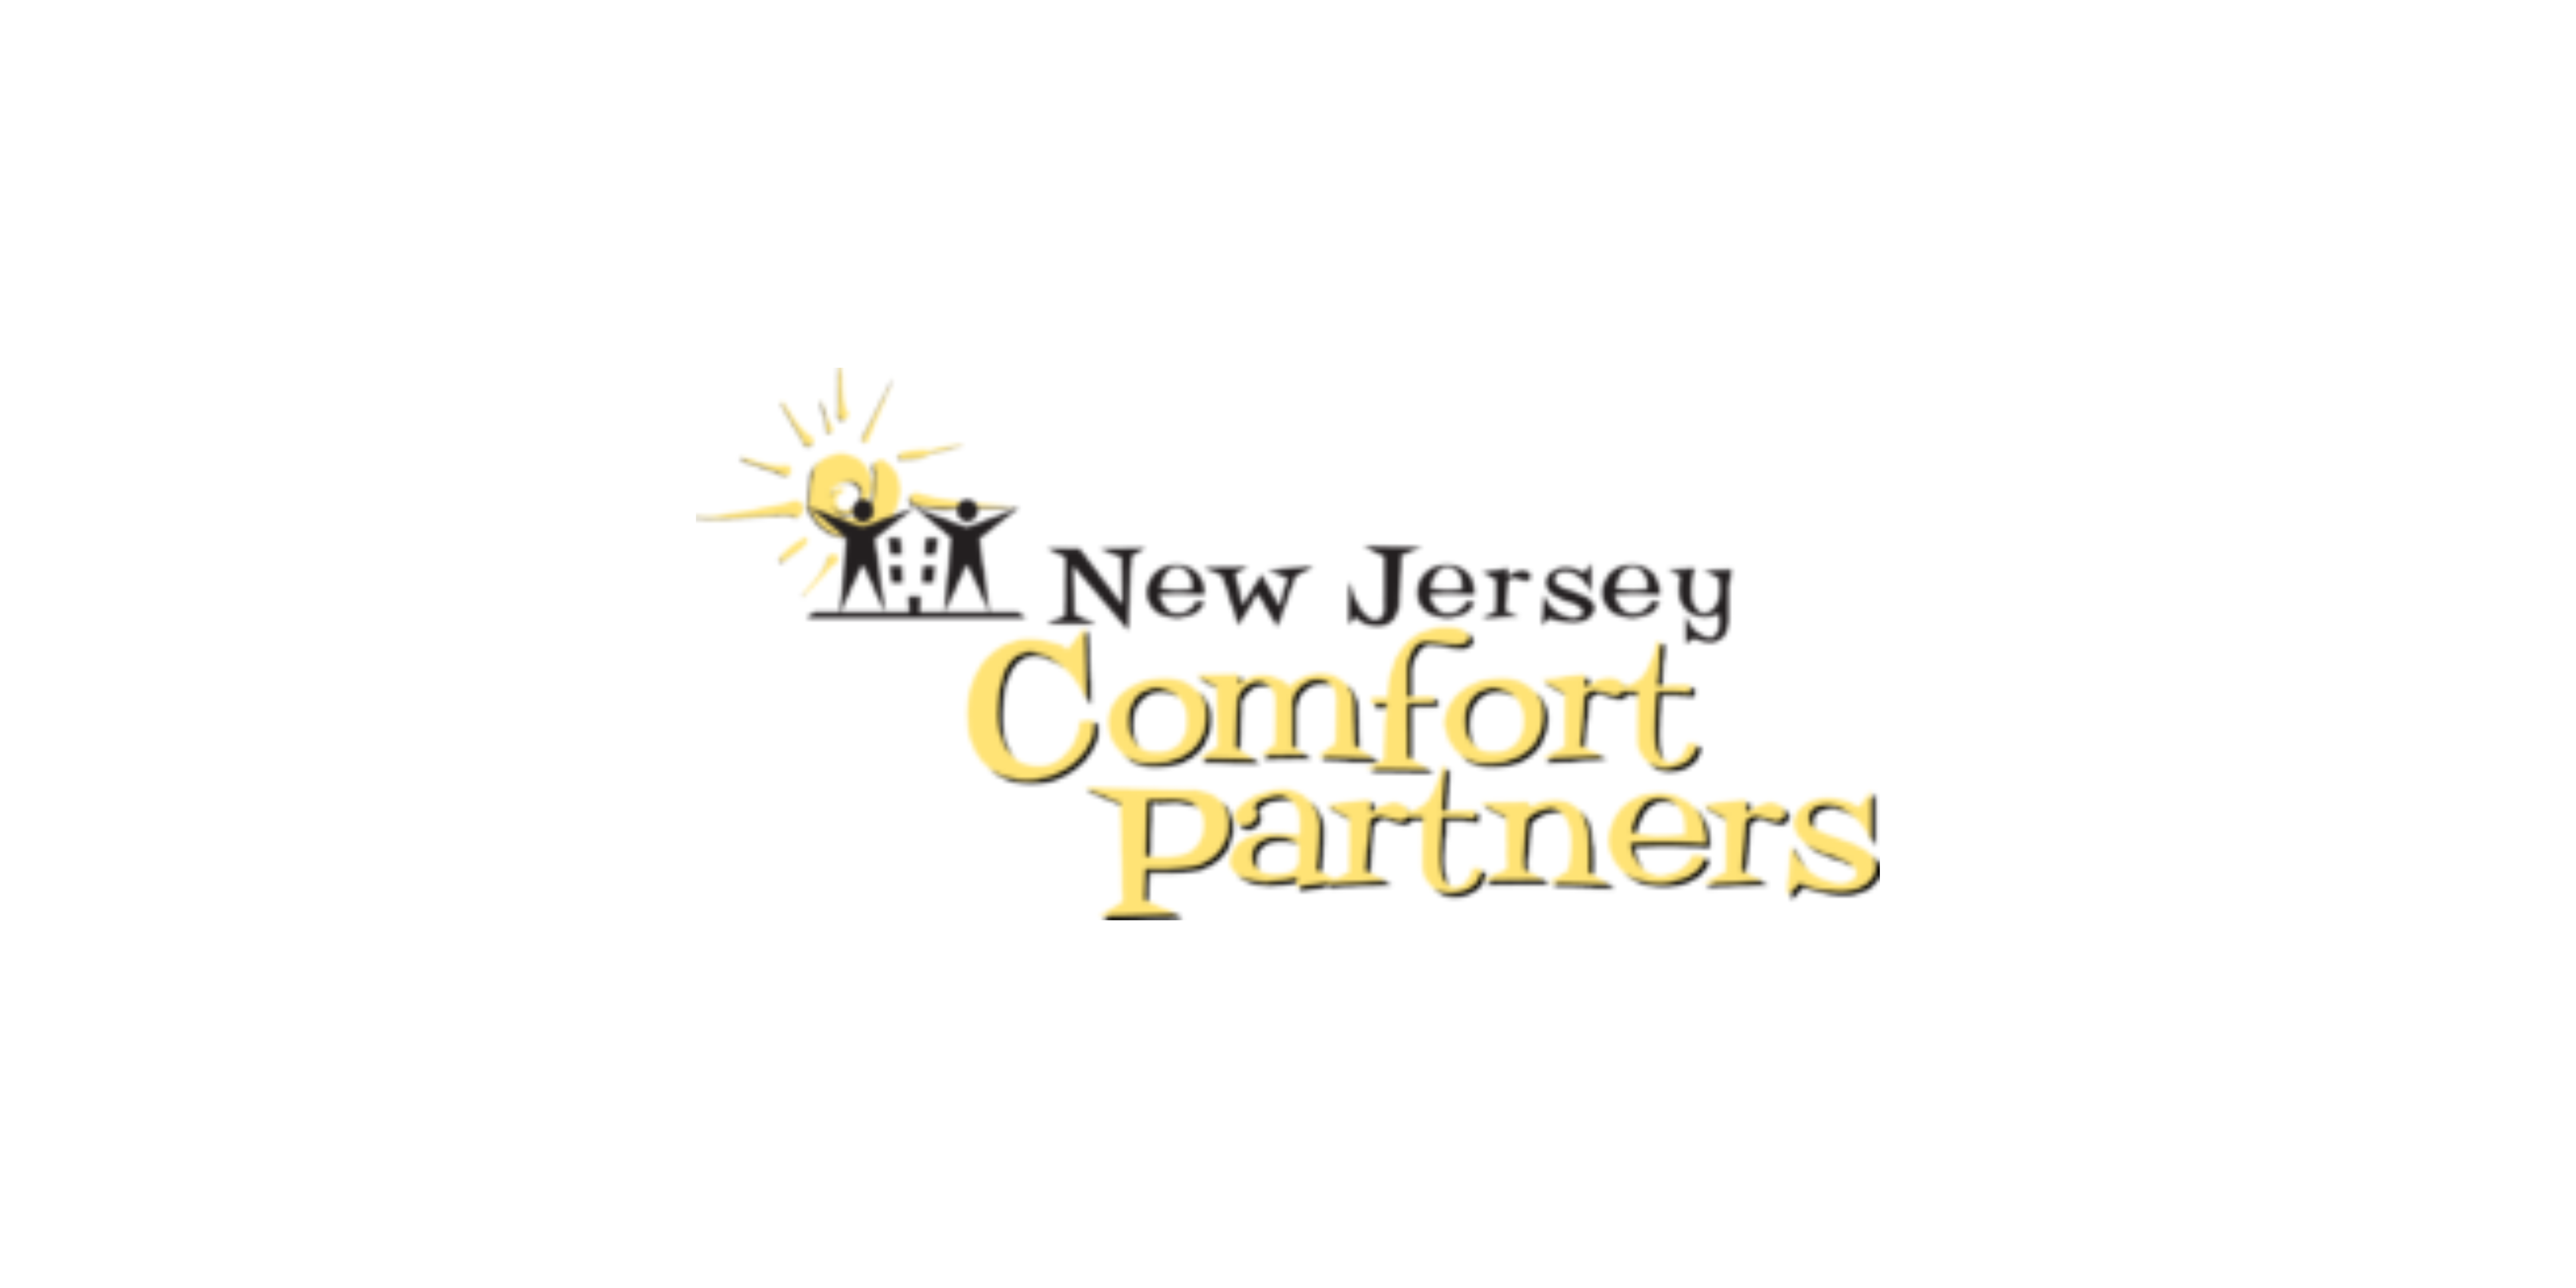 Performance Systems Development (PSD) Re-Awarded Quality Assurance (QA) Services Contract with New Jersey Comfort Partners